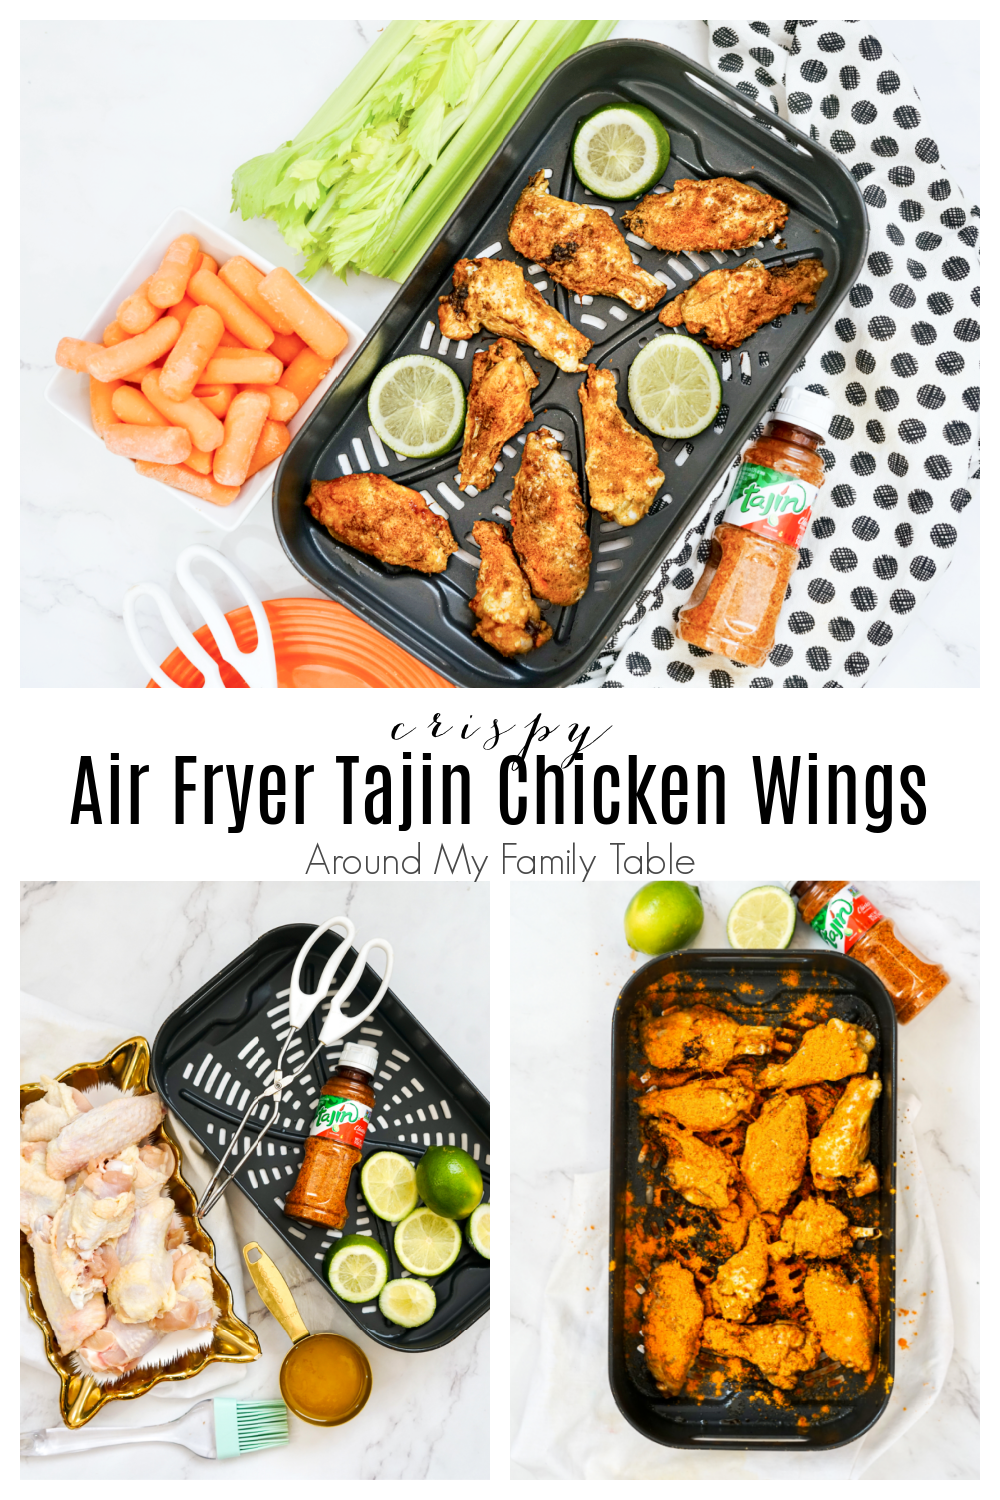 My crispy Air Fryer Tajin Chicken Wings will make your mouth water with the perfect blend of lime, chili, and butter.  Perfect for the big game, but simple enough for dinner any night of the week. These wings are super crispy and are keto, low carb, gluten free, and sugar free! via @slingmama